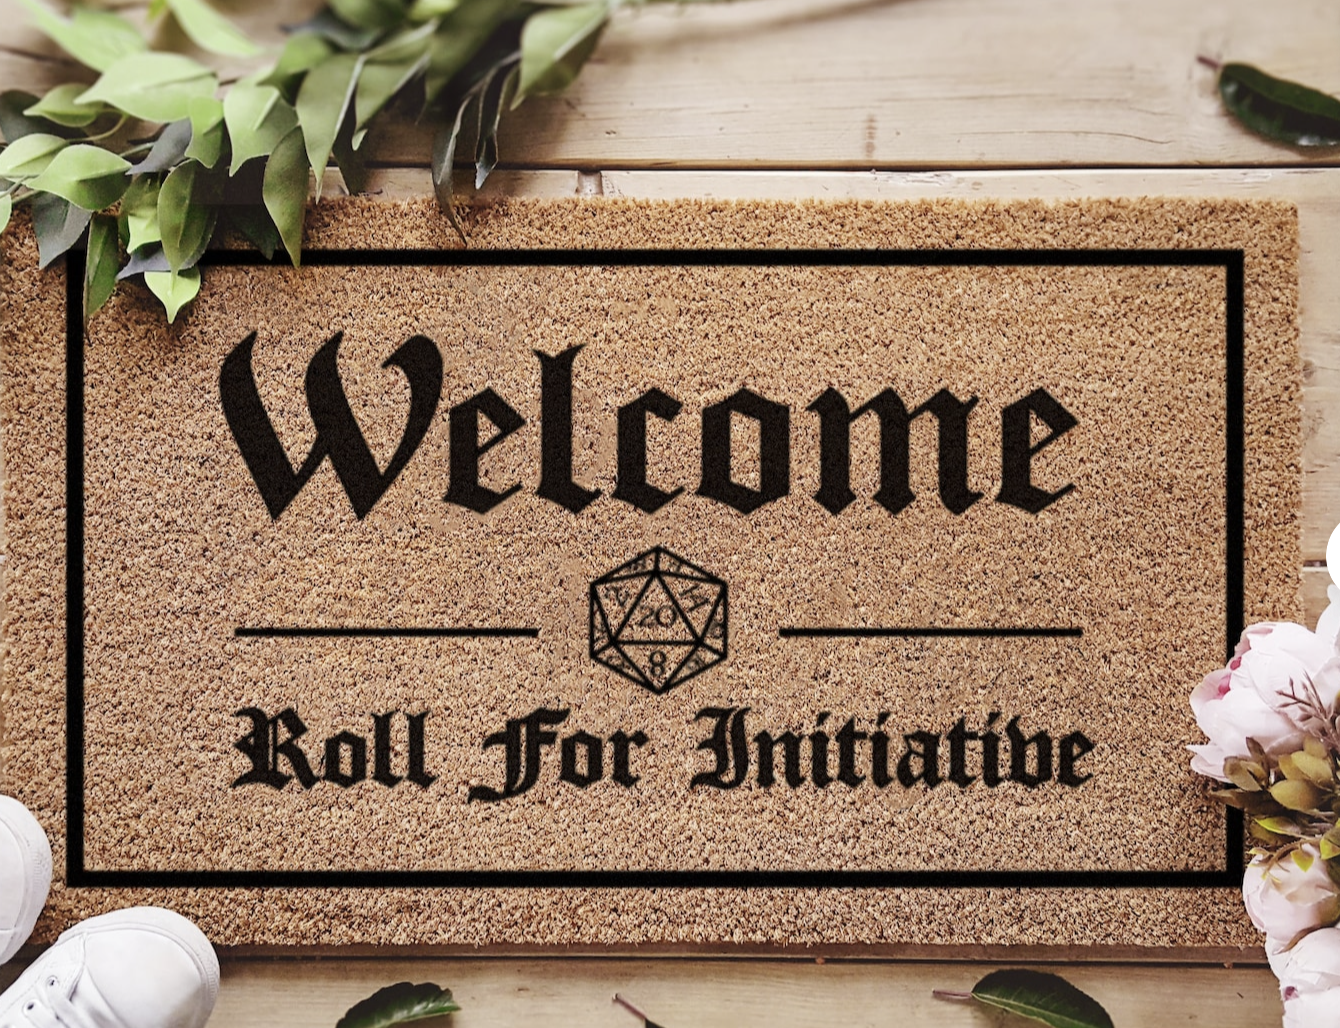 D&D Doormat with a d20 on it "Welcome: Roll For Initiative"